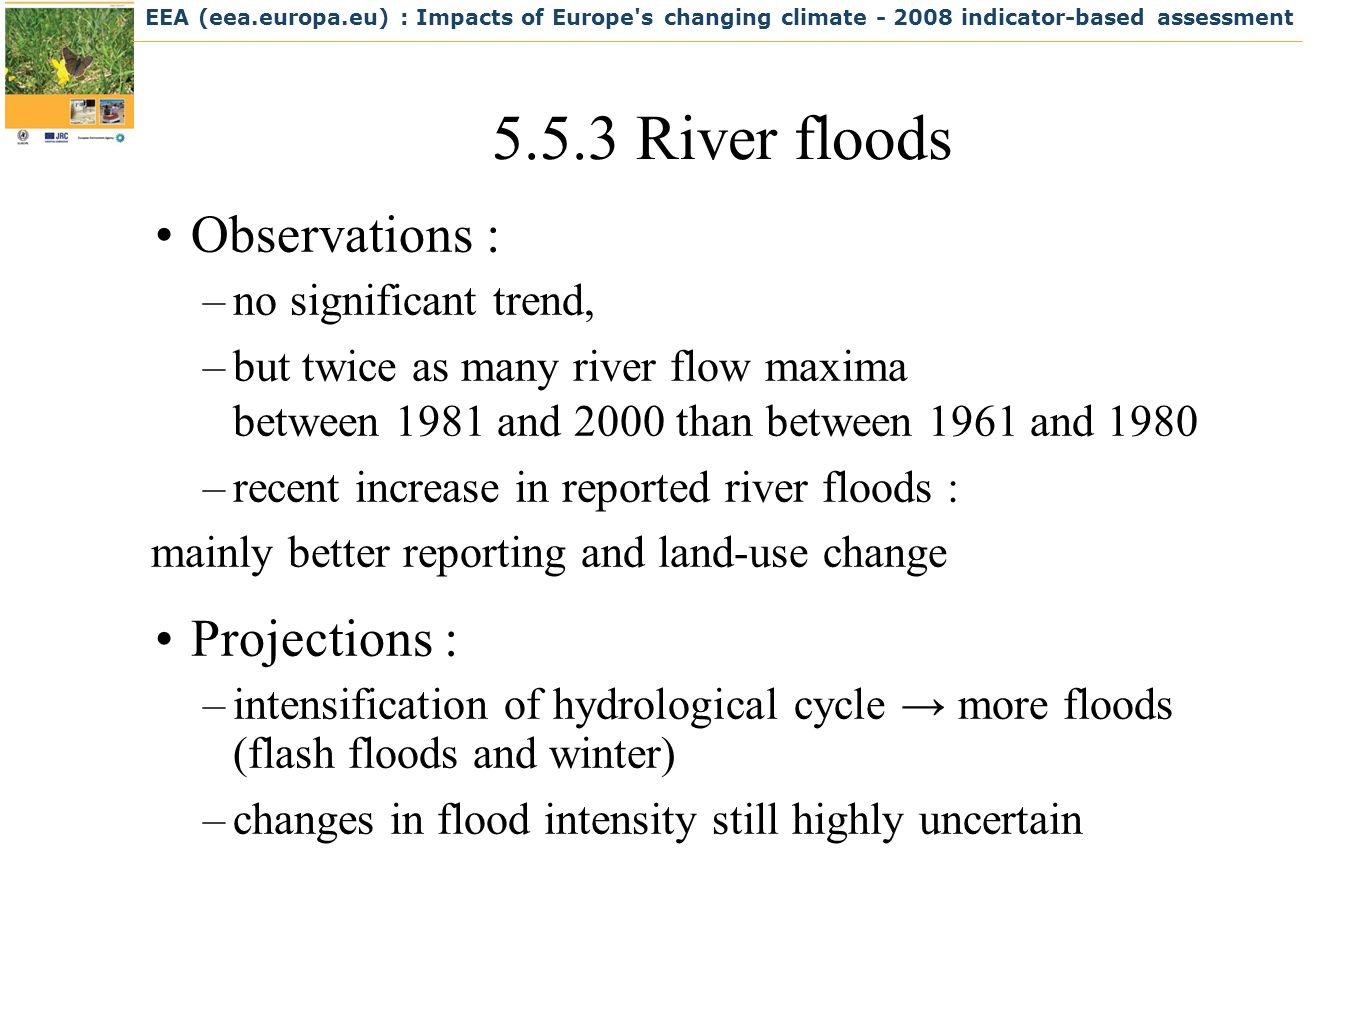 EEA (eea.europa.eu) : Impacts of Europe s changing climate indicator-based assessment River floods Observations : –no significant trend, –but twice as many river flow maxima between 1981 and 2000 than between 1961 and 1980 –recent increase in reported river floods : mainly better reporting and land-use change Projections : –intensification of hydrological cycle more floods (flash floods and winter) –changes in flood intensity still highly uncertain